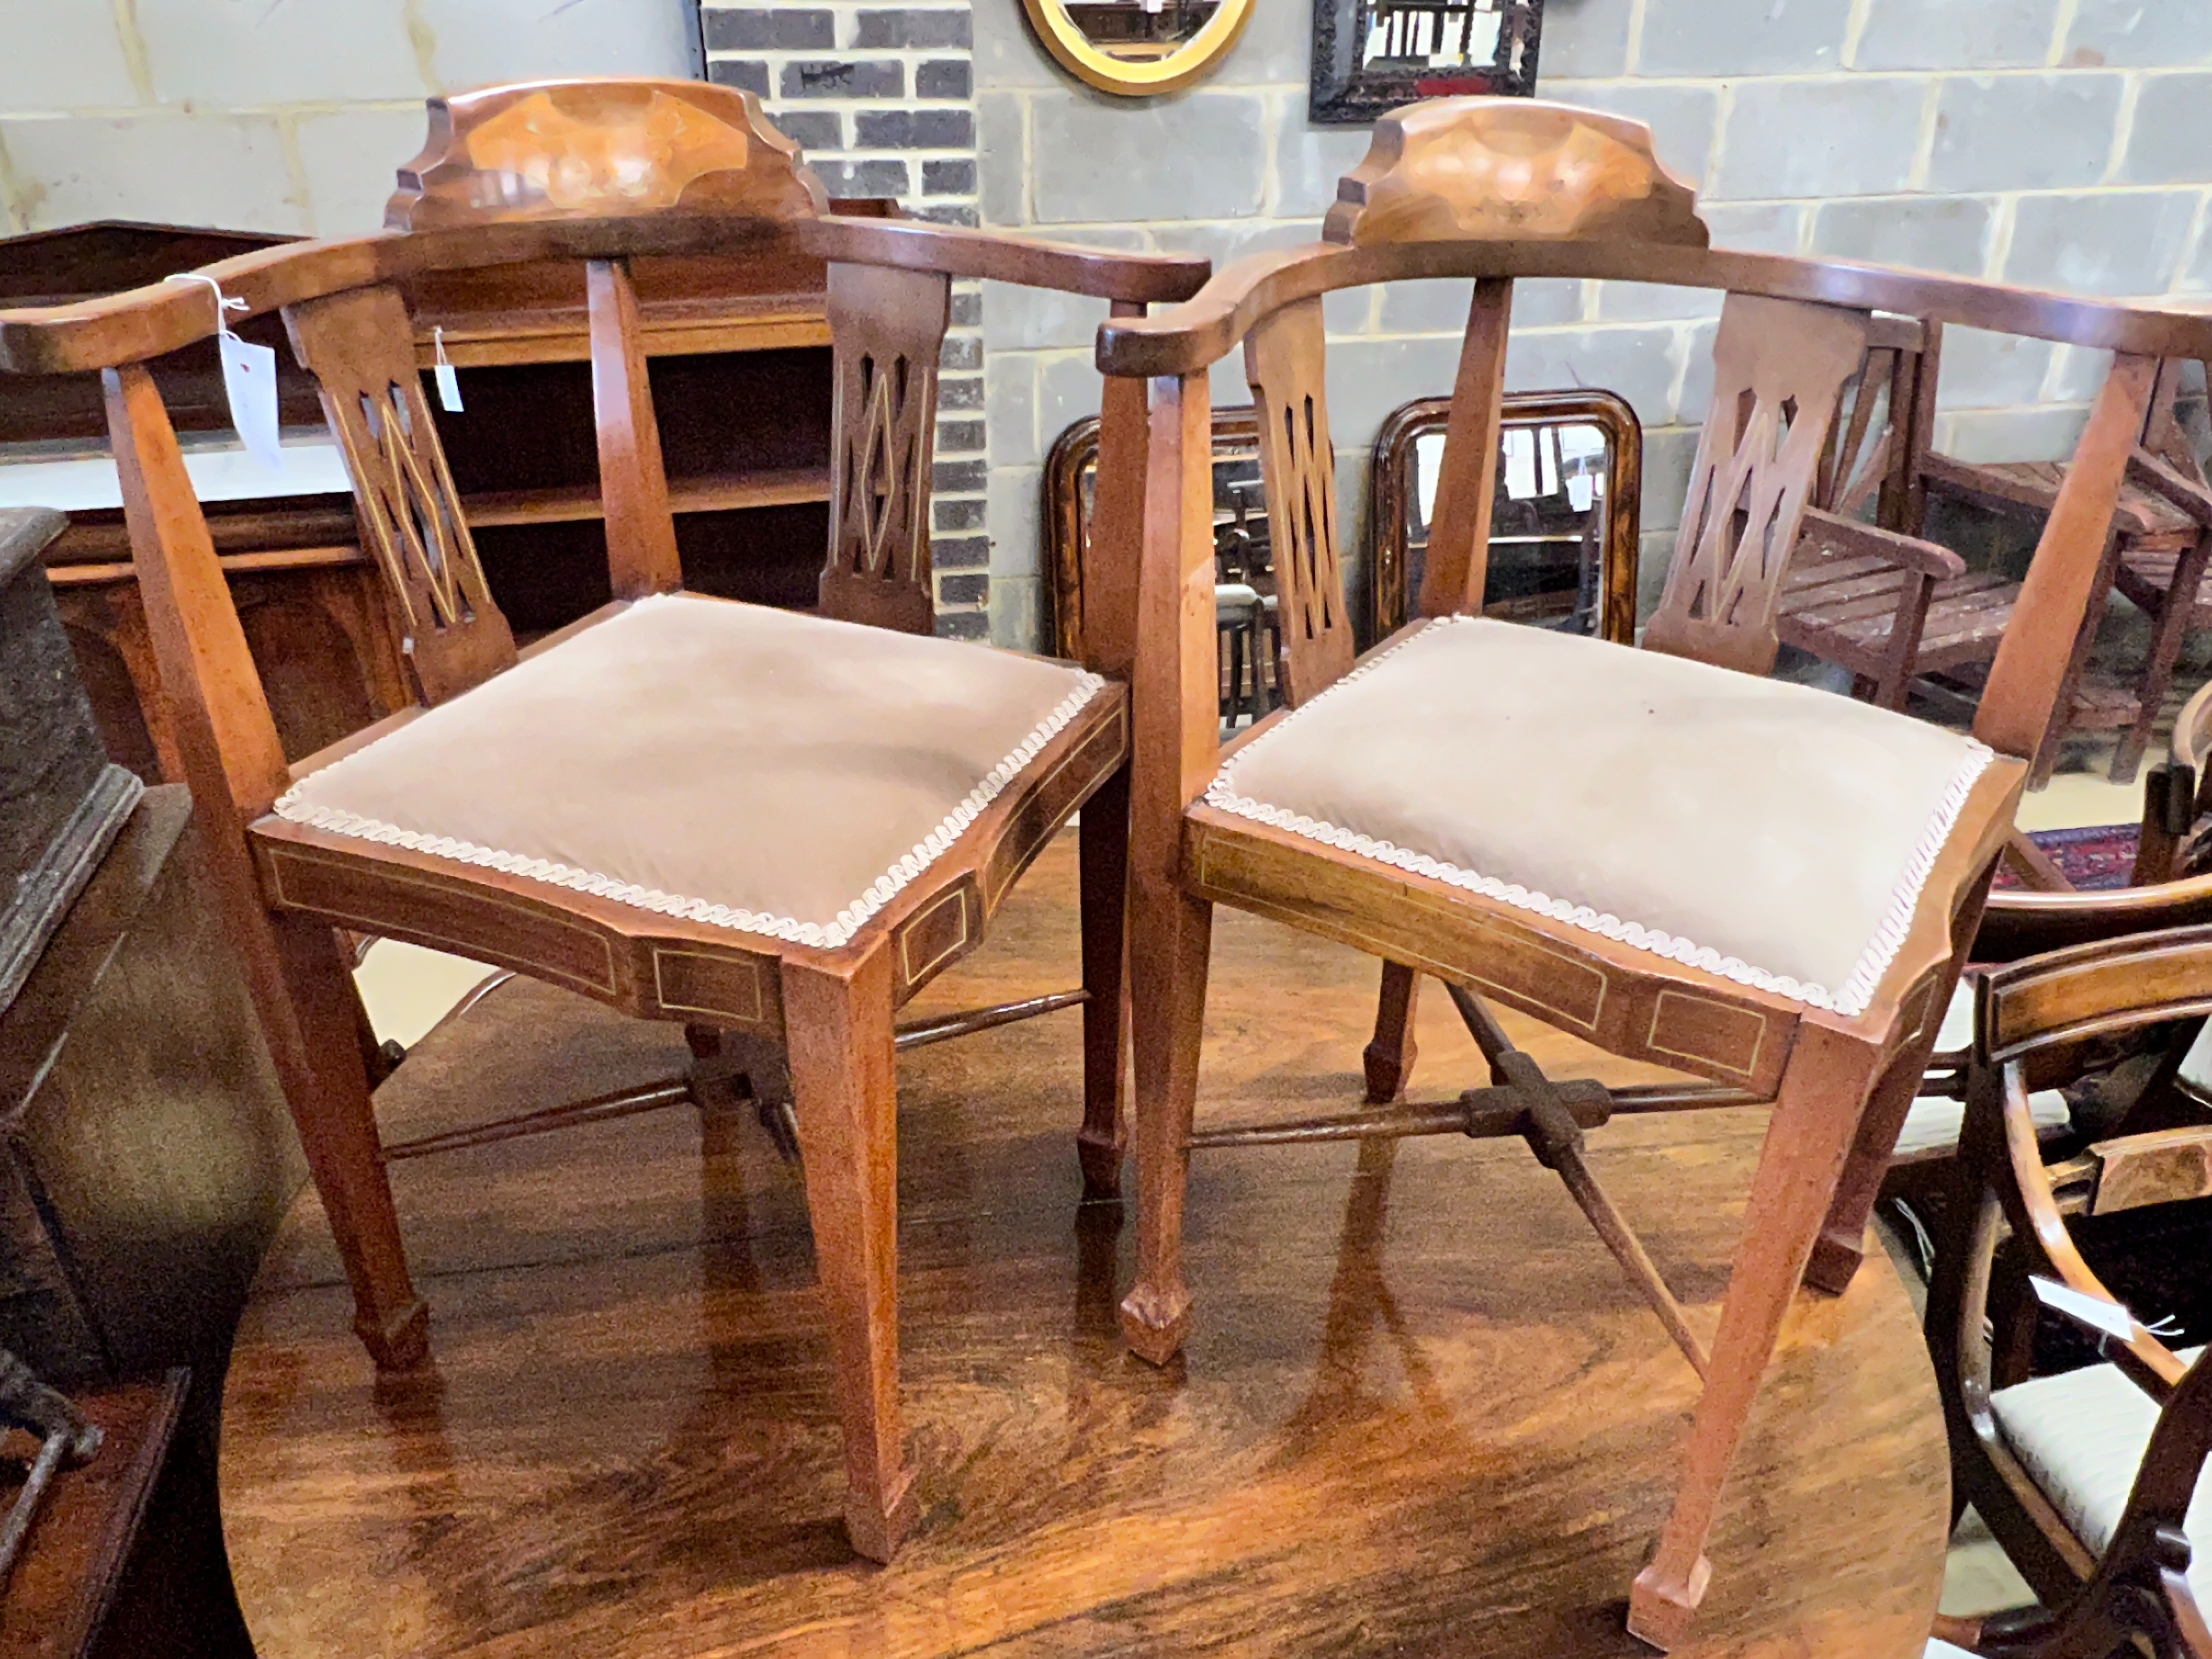 A pair of Edwardian inlaid mahogany corner elbow chairs